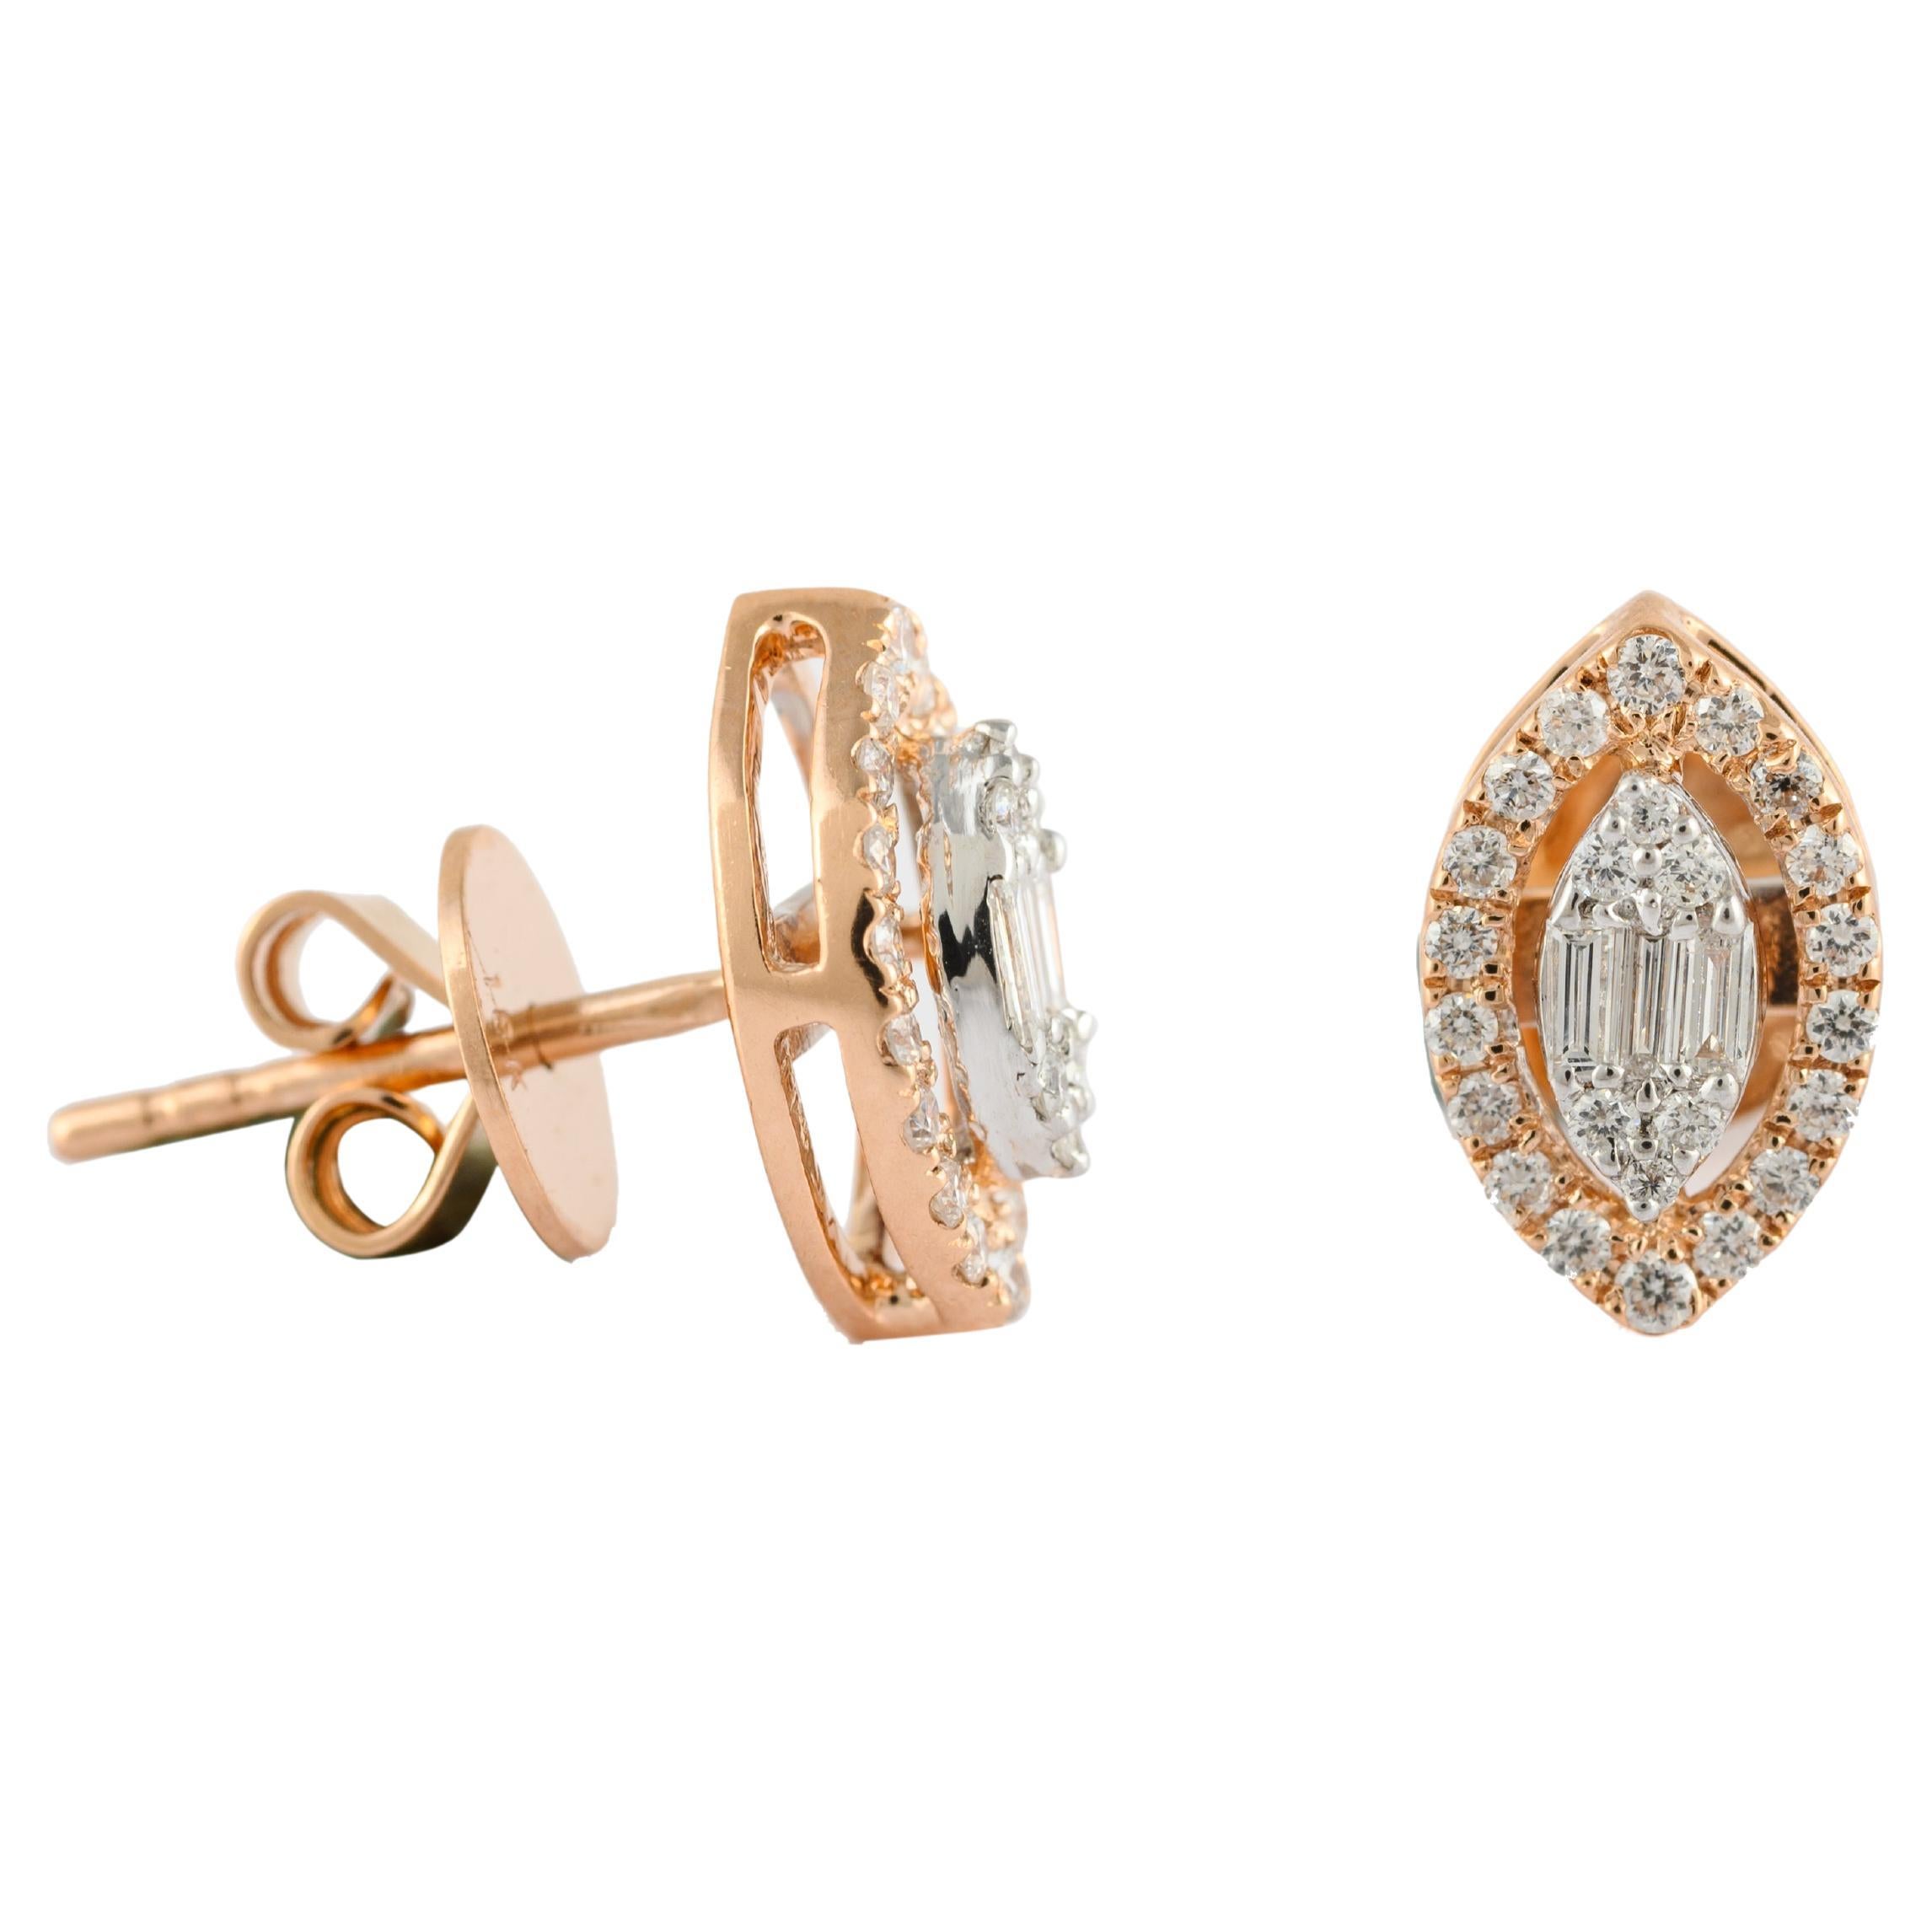 Minimal Leaf Shaped Diamond Pushback Stud Earrings in 18K Gold to make a statement with your look. You shall need stud earrings to make a statement with your look. These earrings create a sparkling, luxurious look featuring round cut diamonds.
April